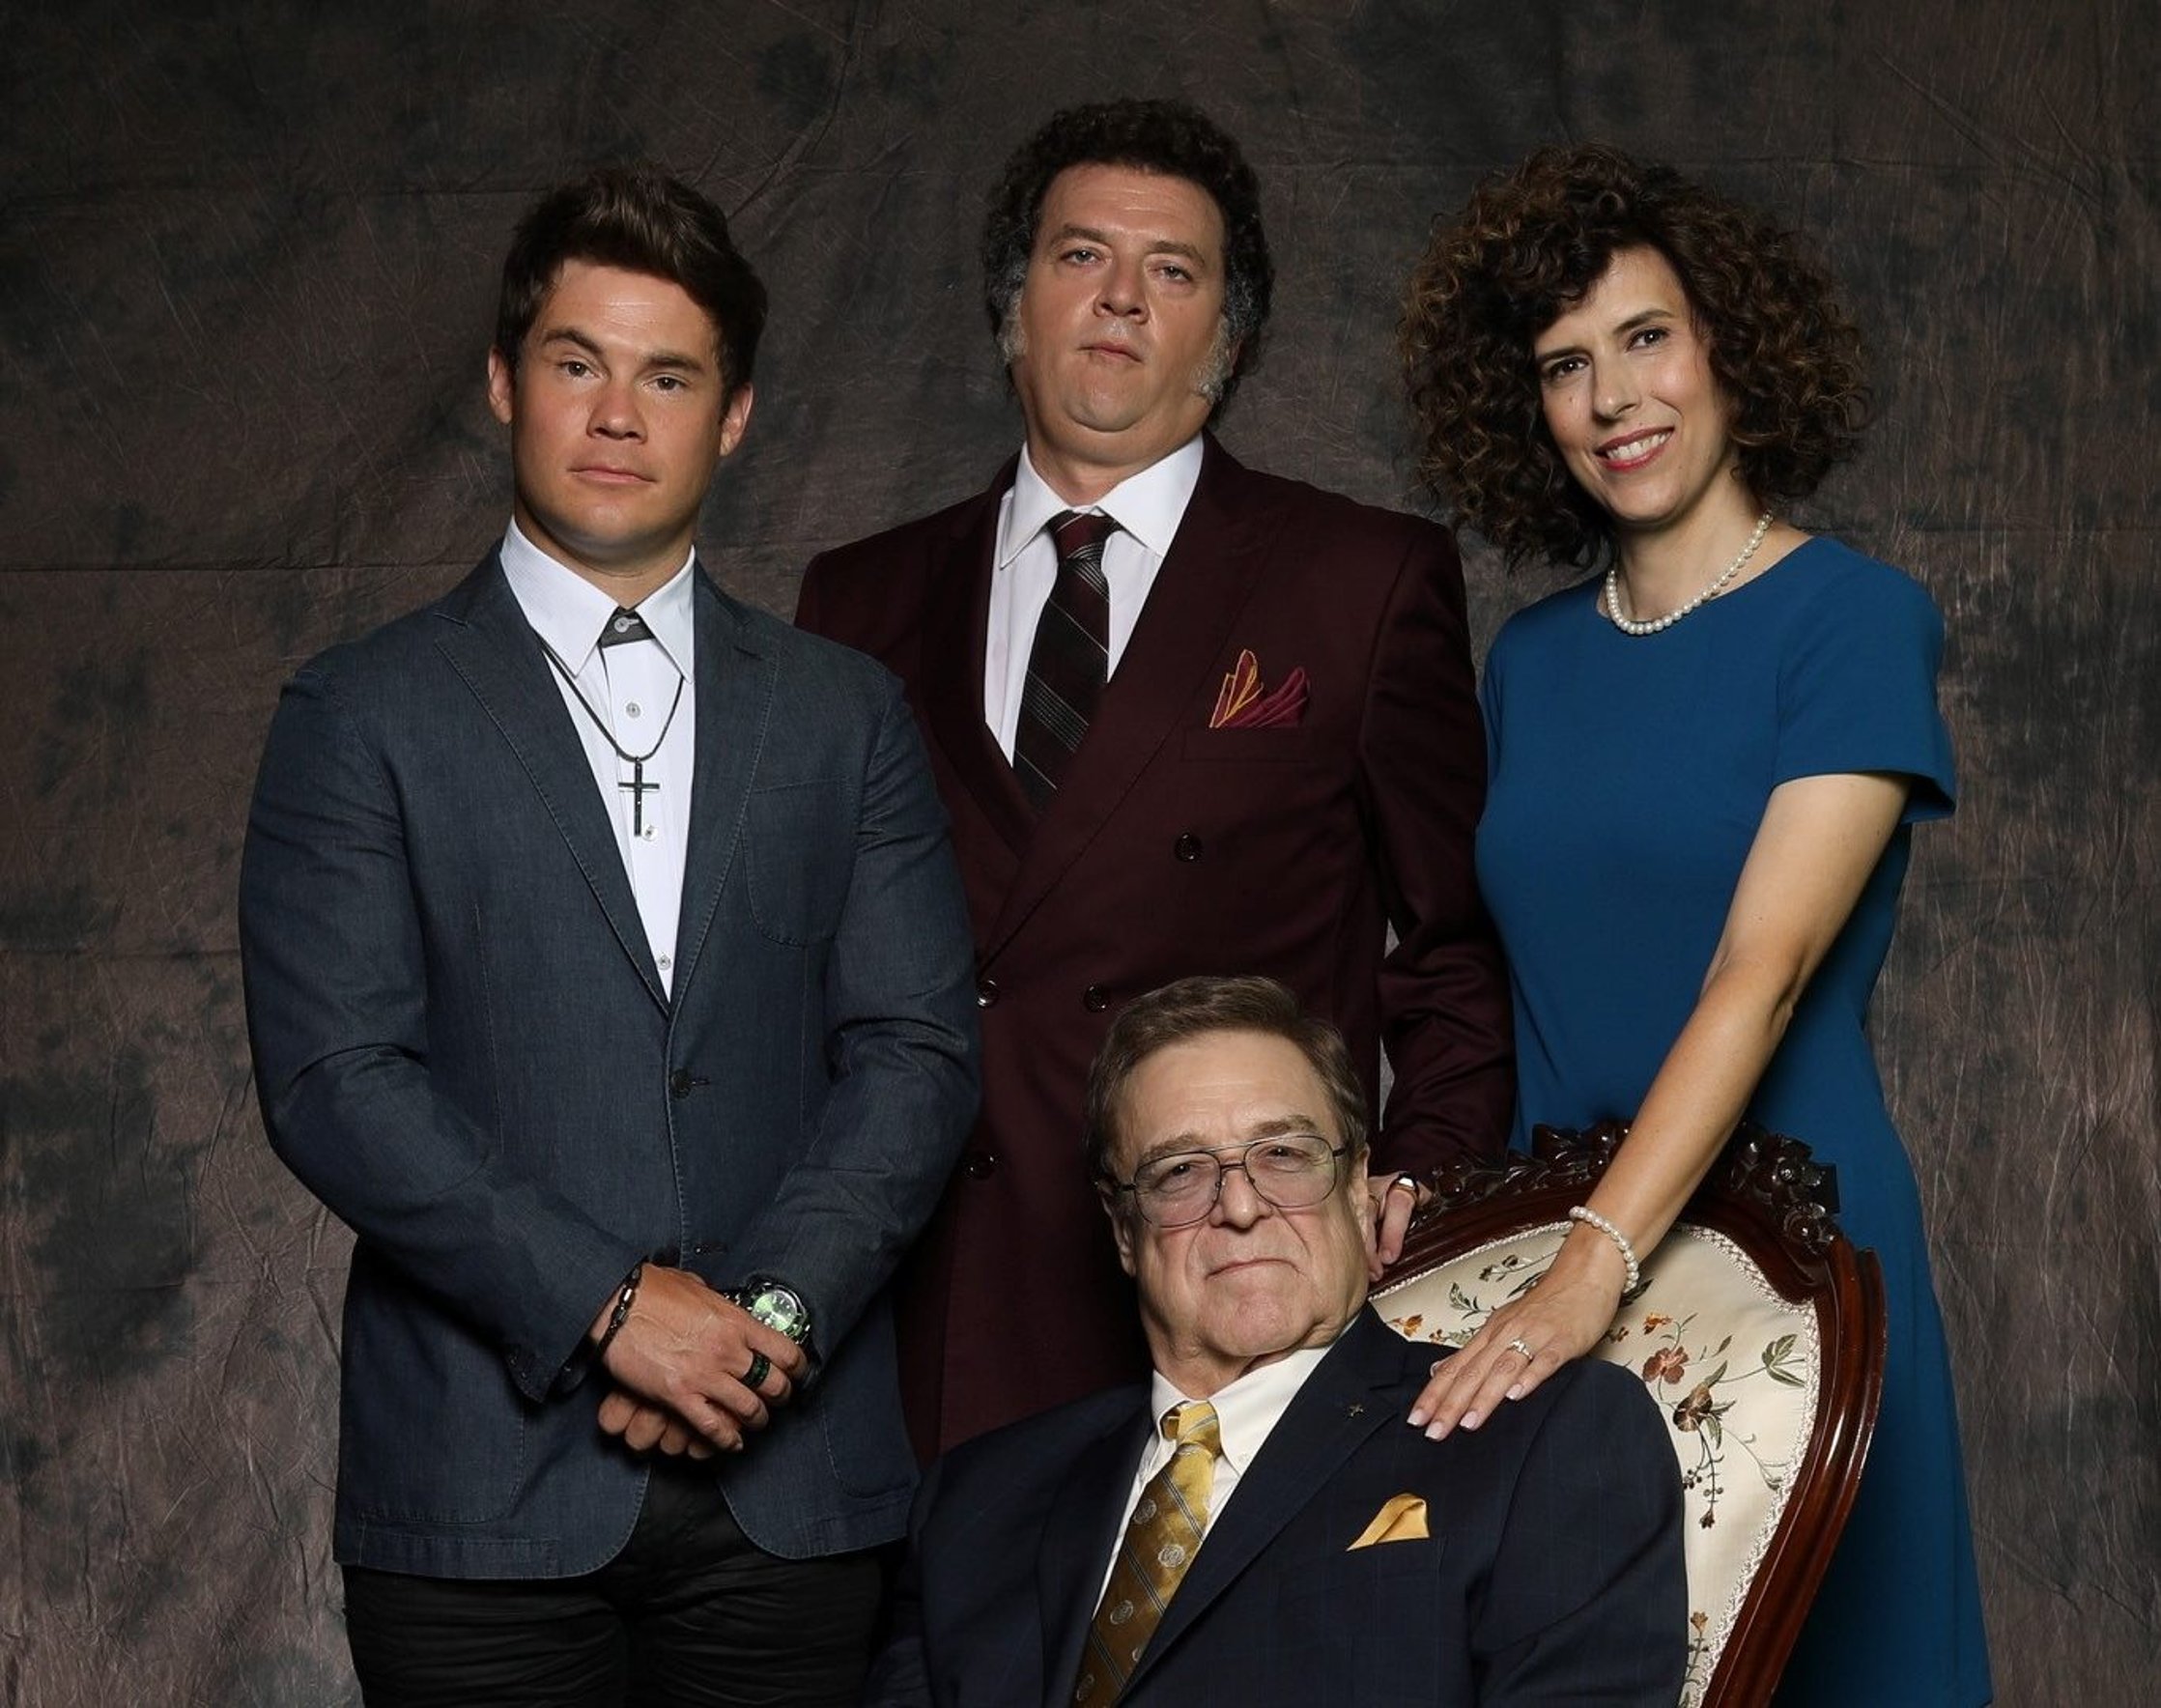 HBO’s The Righteous Gemstones Casting Extras!